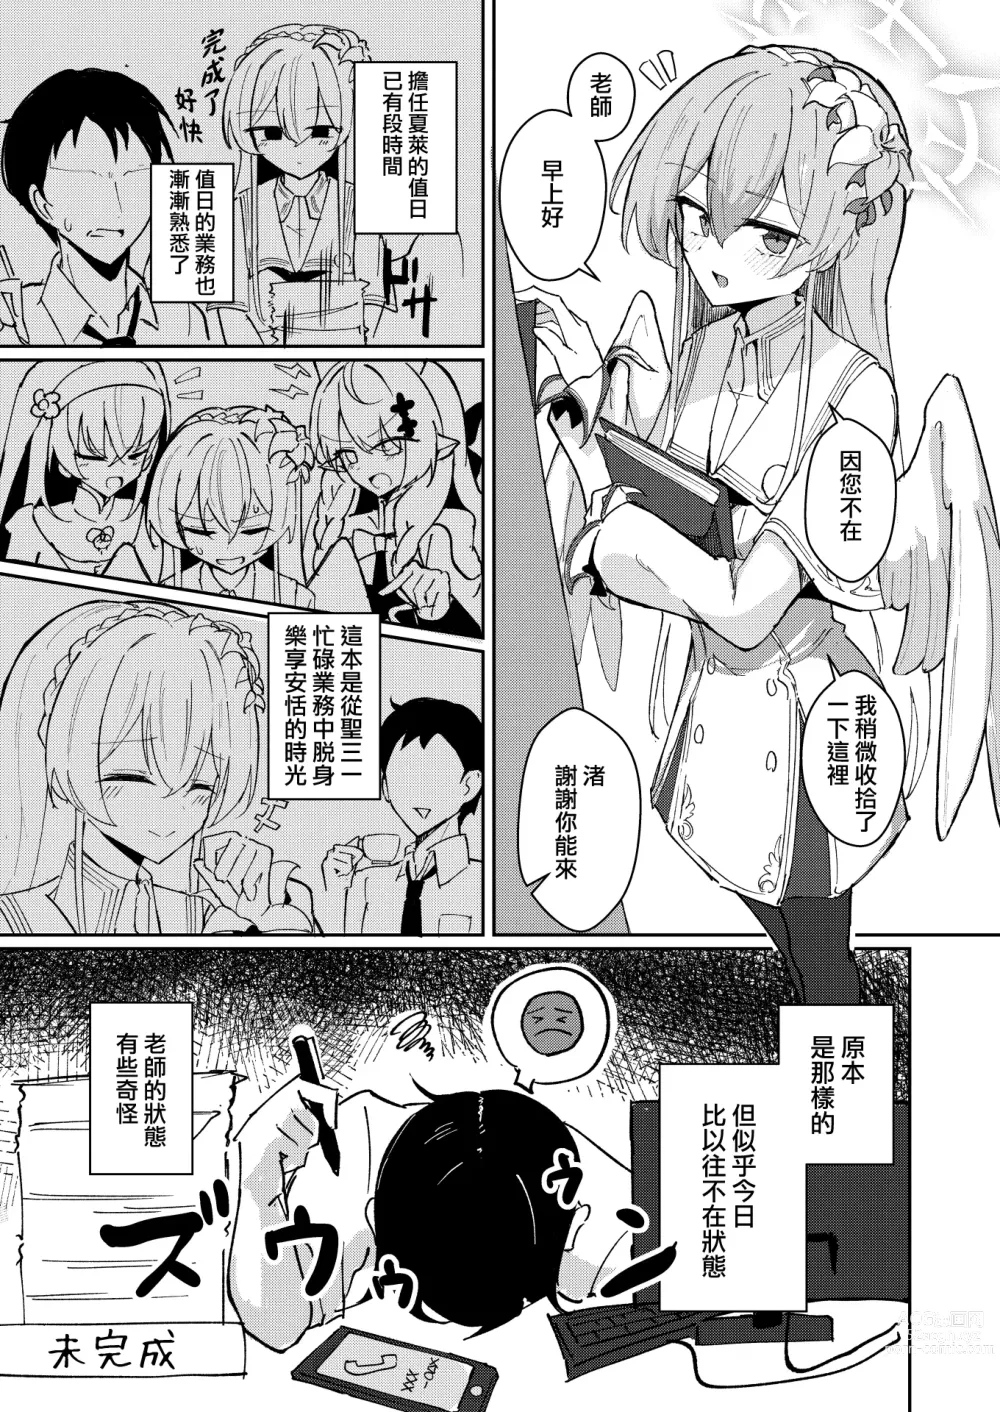 Page 4 of doujinshi 情欲羽翼下的學生會